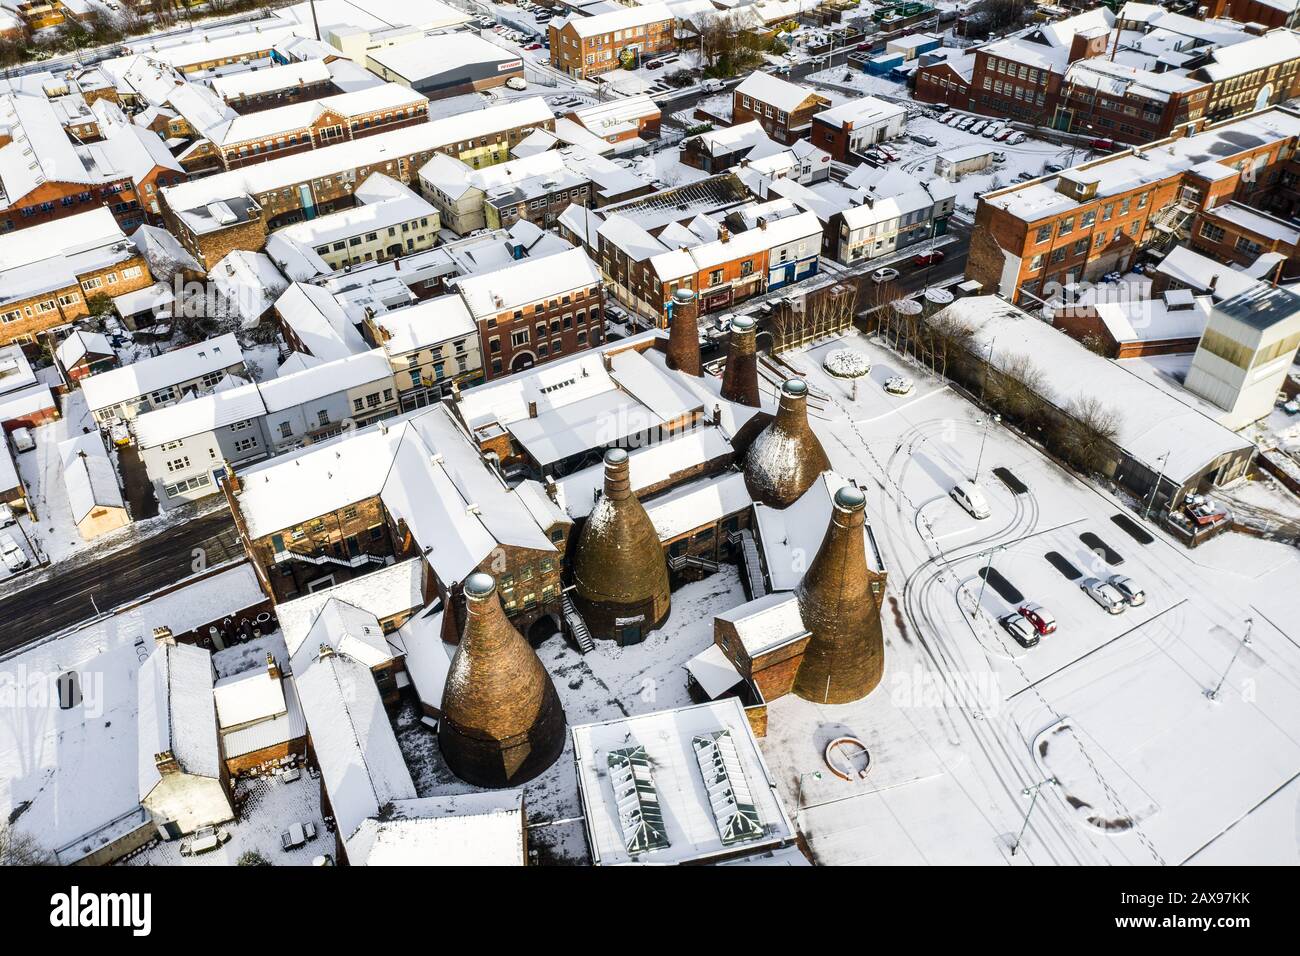 Aerial view of bottle kilns at Gladstone Pottery Museum, covered in snow on a cold winter day, Pottery manufacturing, snow in Stoke on Trent Stock Photo